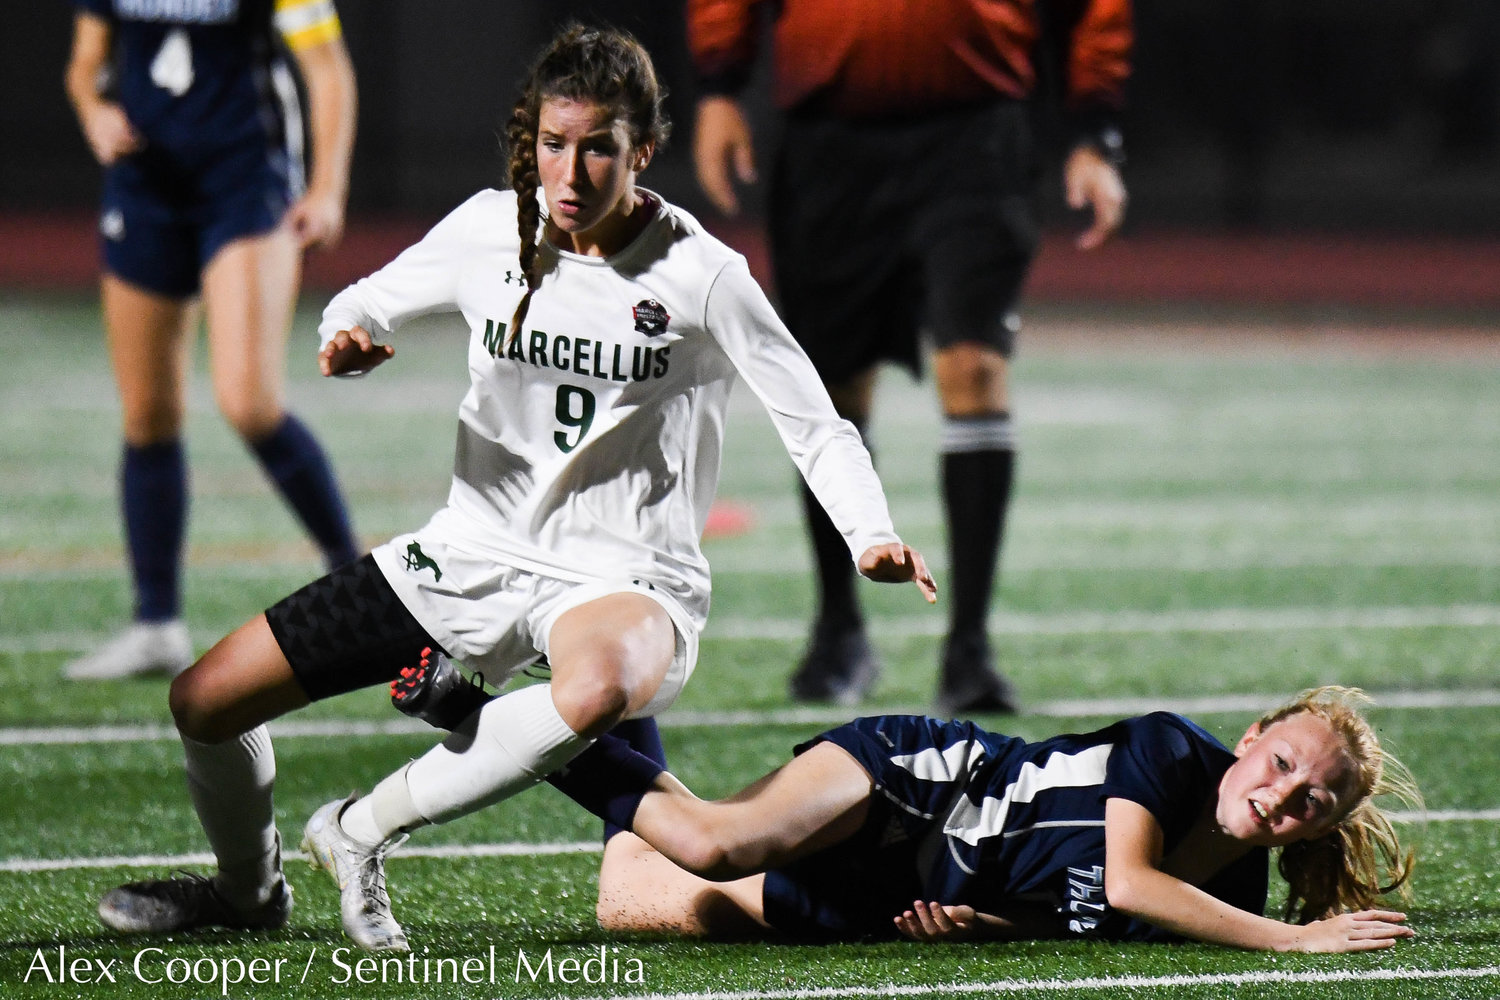 Central Valley Academy player Jenna Johnson falls to the the turf after colliding with Marcellus player Claire Card (9) during the Class B girls soccer semifinals game on Wednesday, Oct. 26 at Chittenango High School. CVA won 2-0.